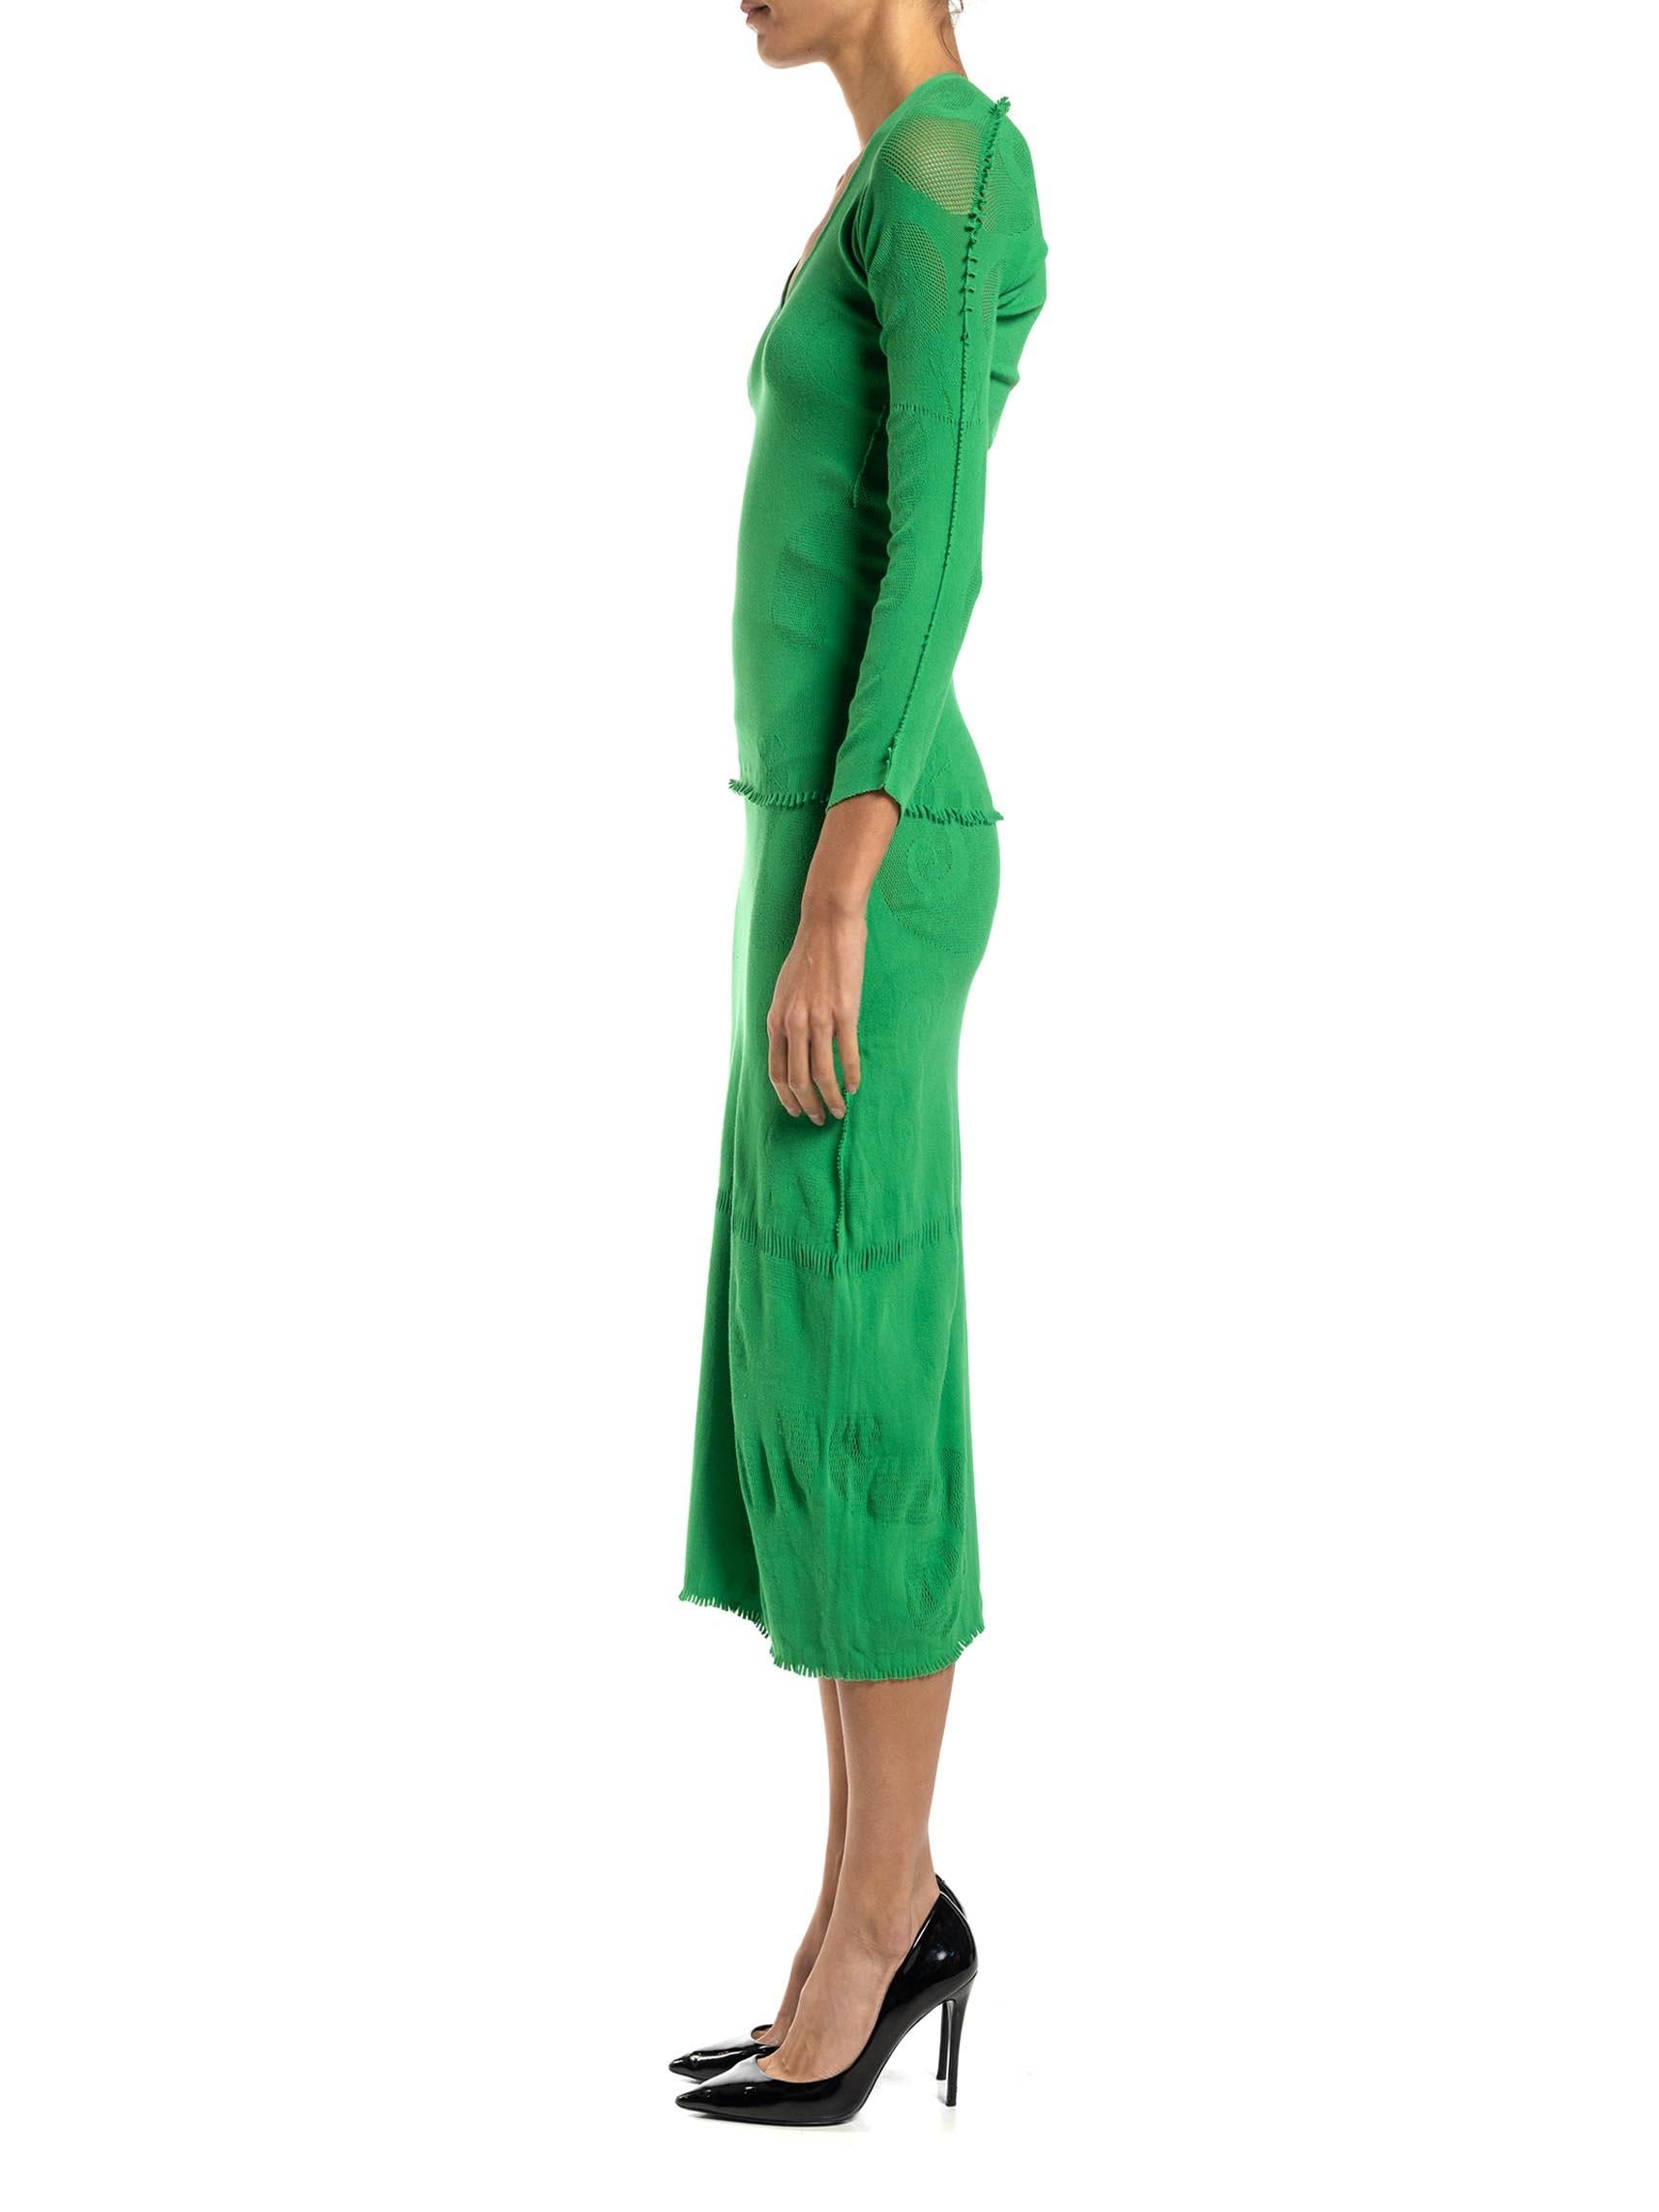 1990S A-POC BY ISSEY MIYAKE Grass Green Poly Blend Knit Top & Skirt Ensemble In Excellent Condition For Sale In New York, NY